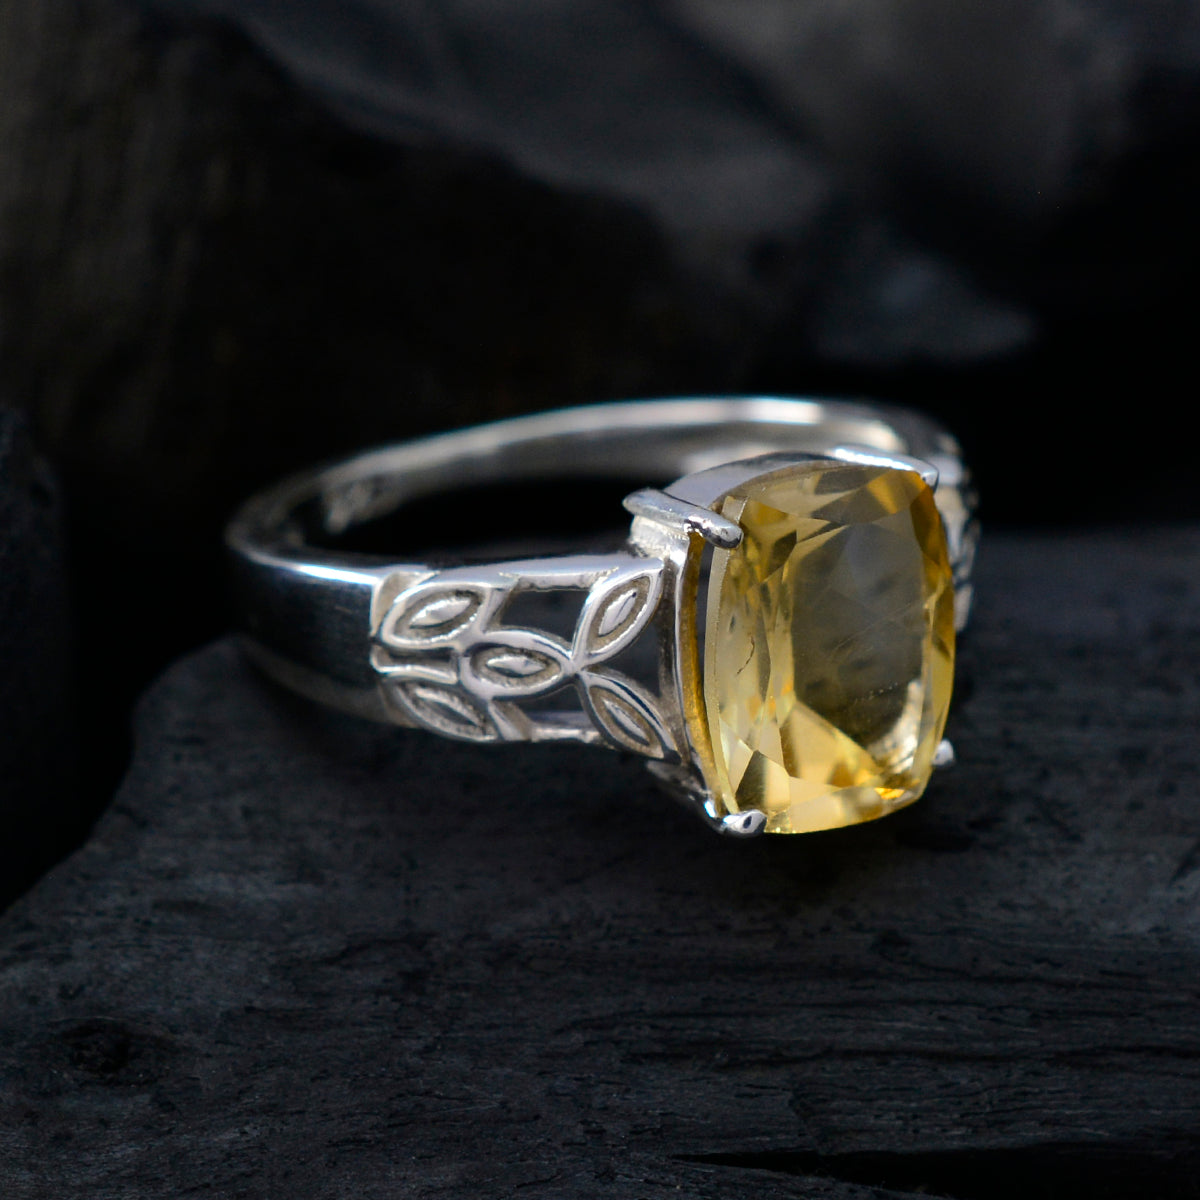 Desirable Gem Citrine 925 Sterling Silver Ring Steampunk Jewelry